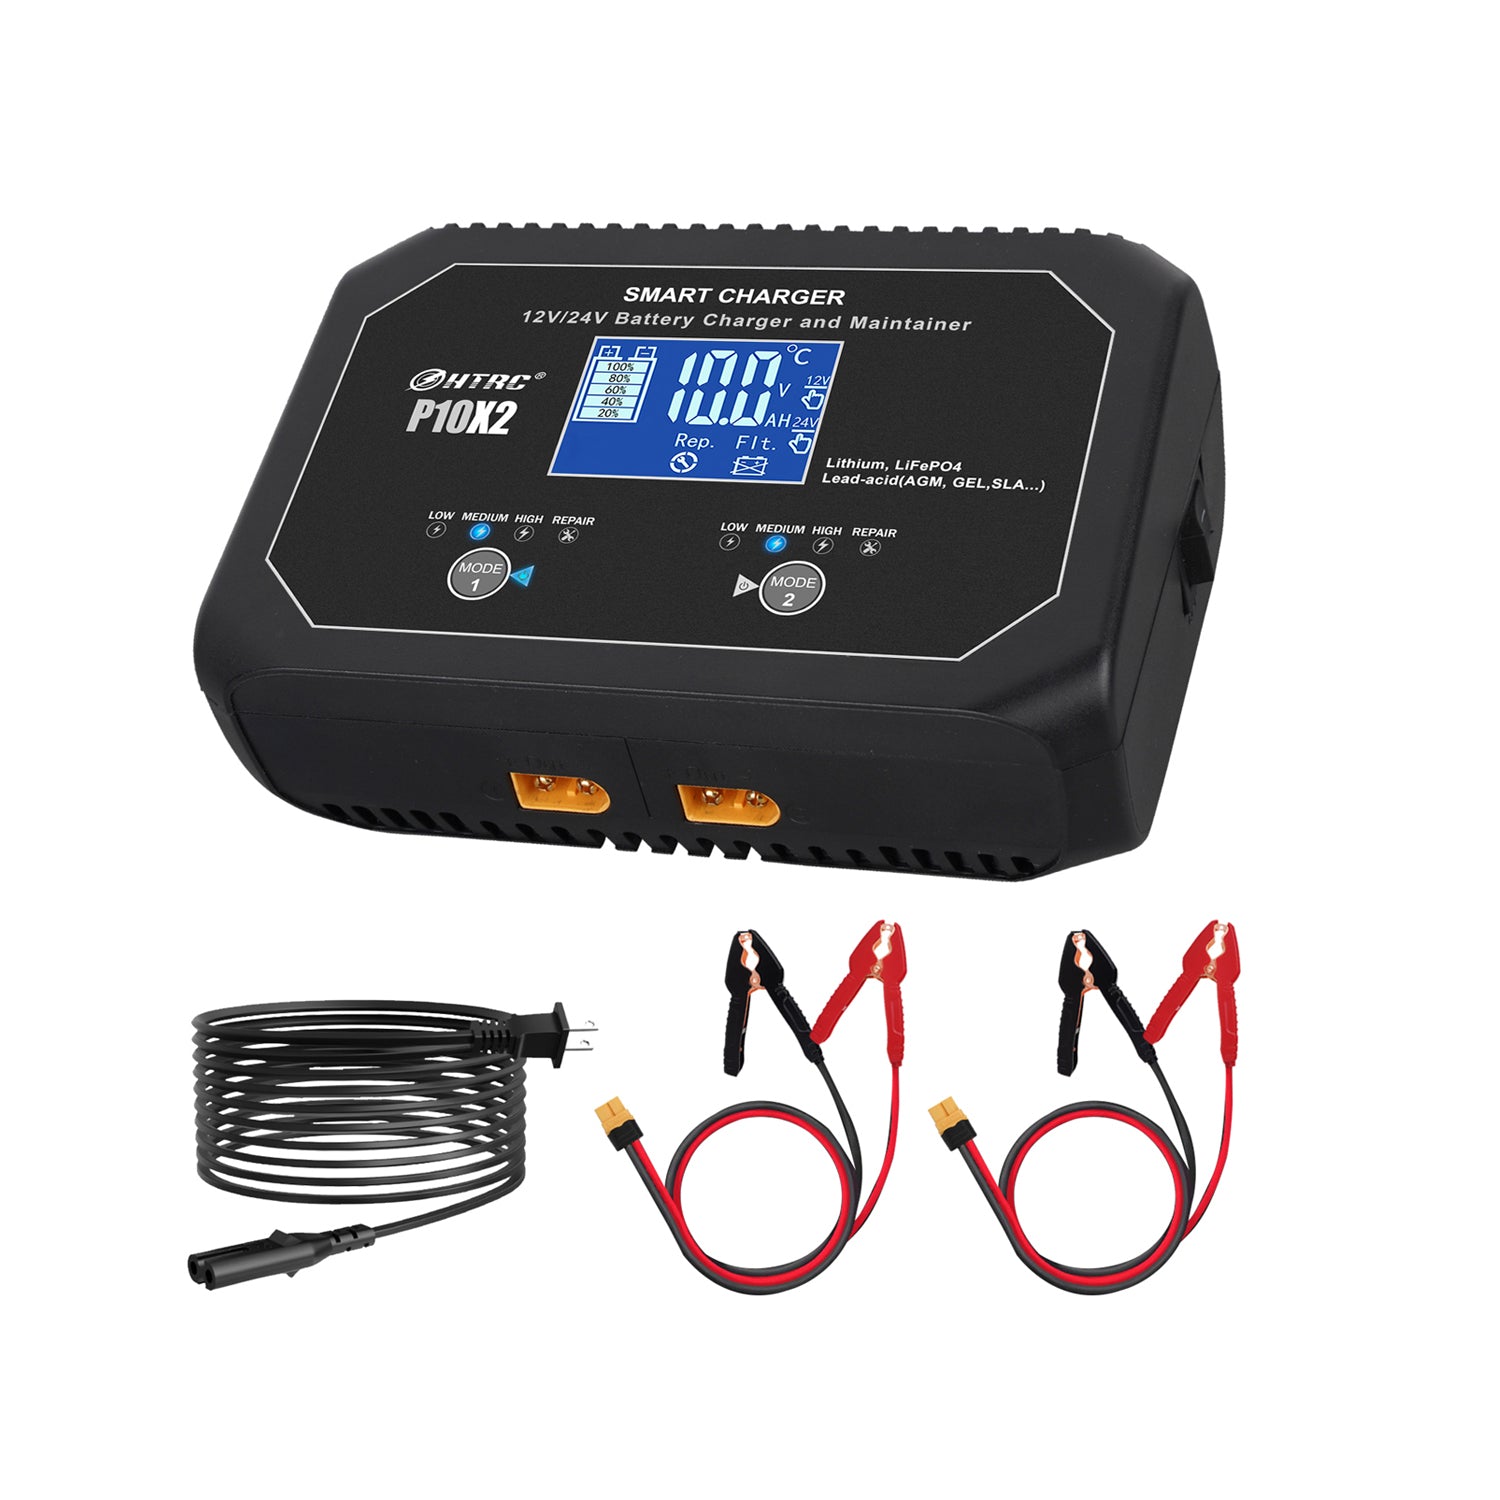 Battery Charger - 24 V 20 A